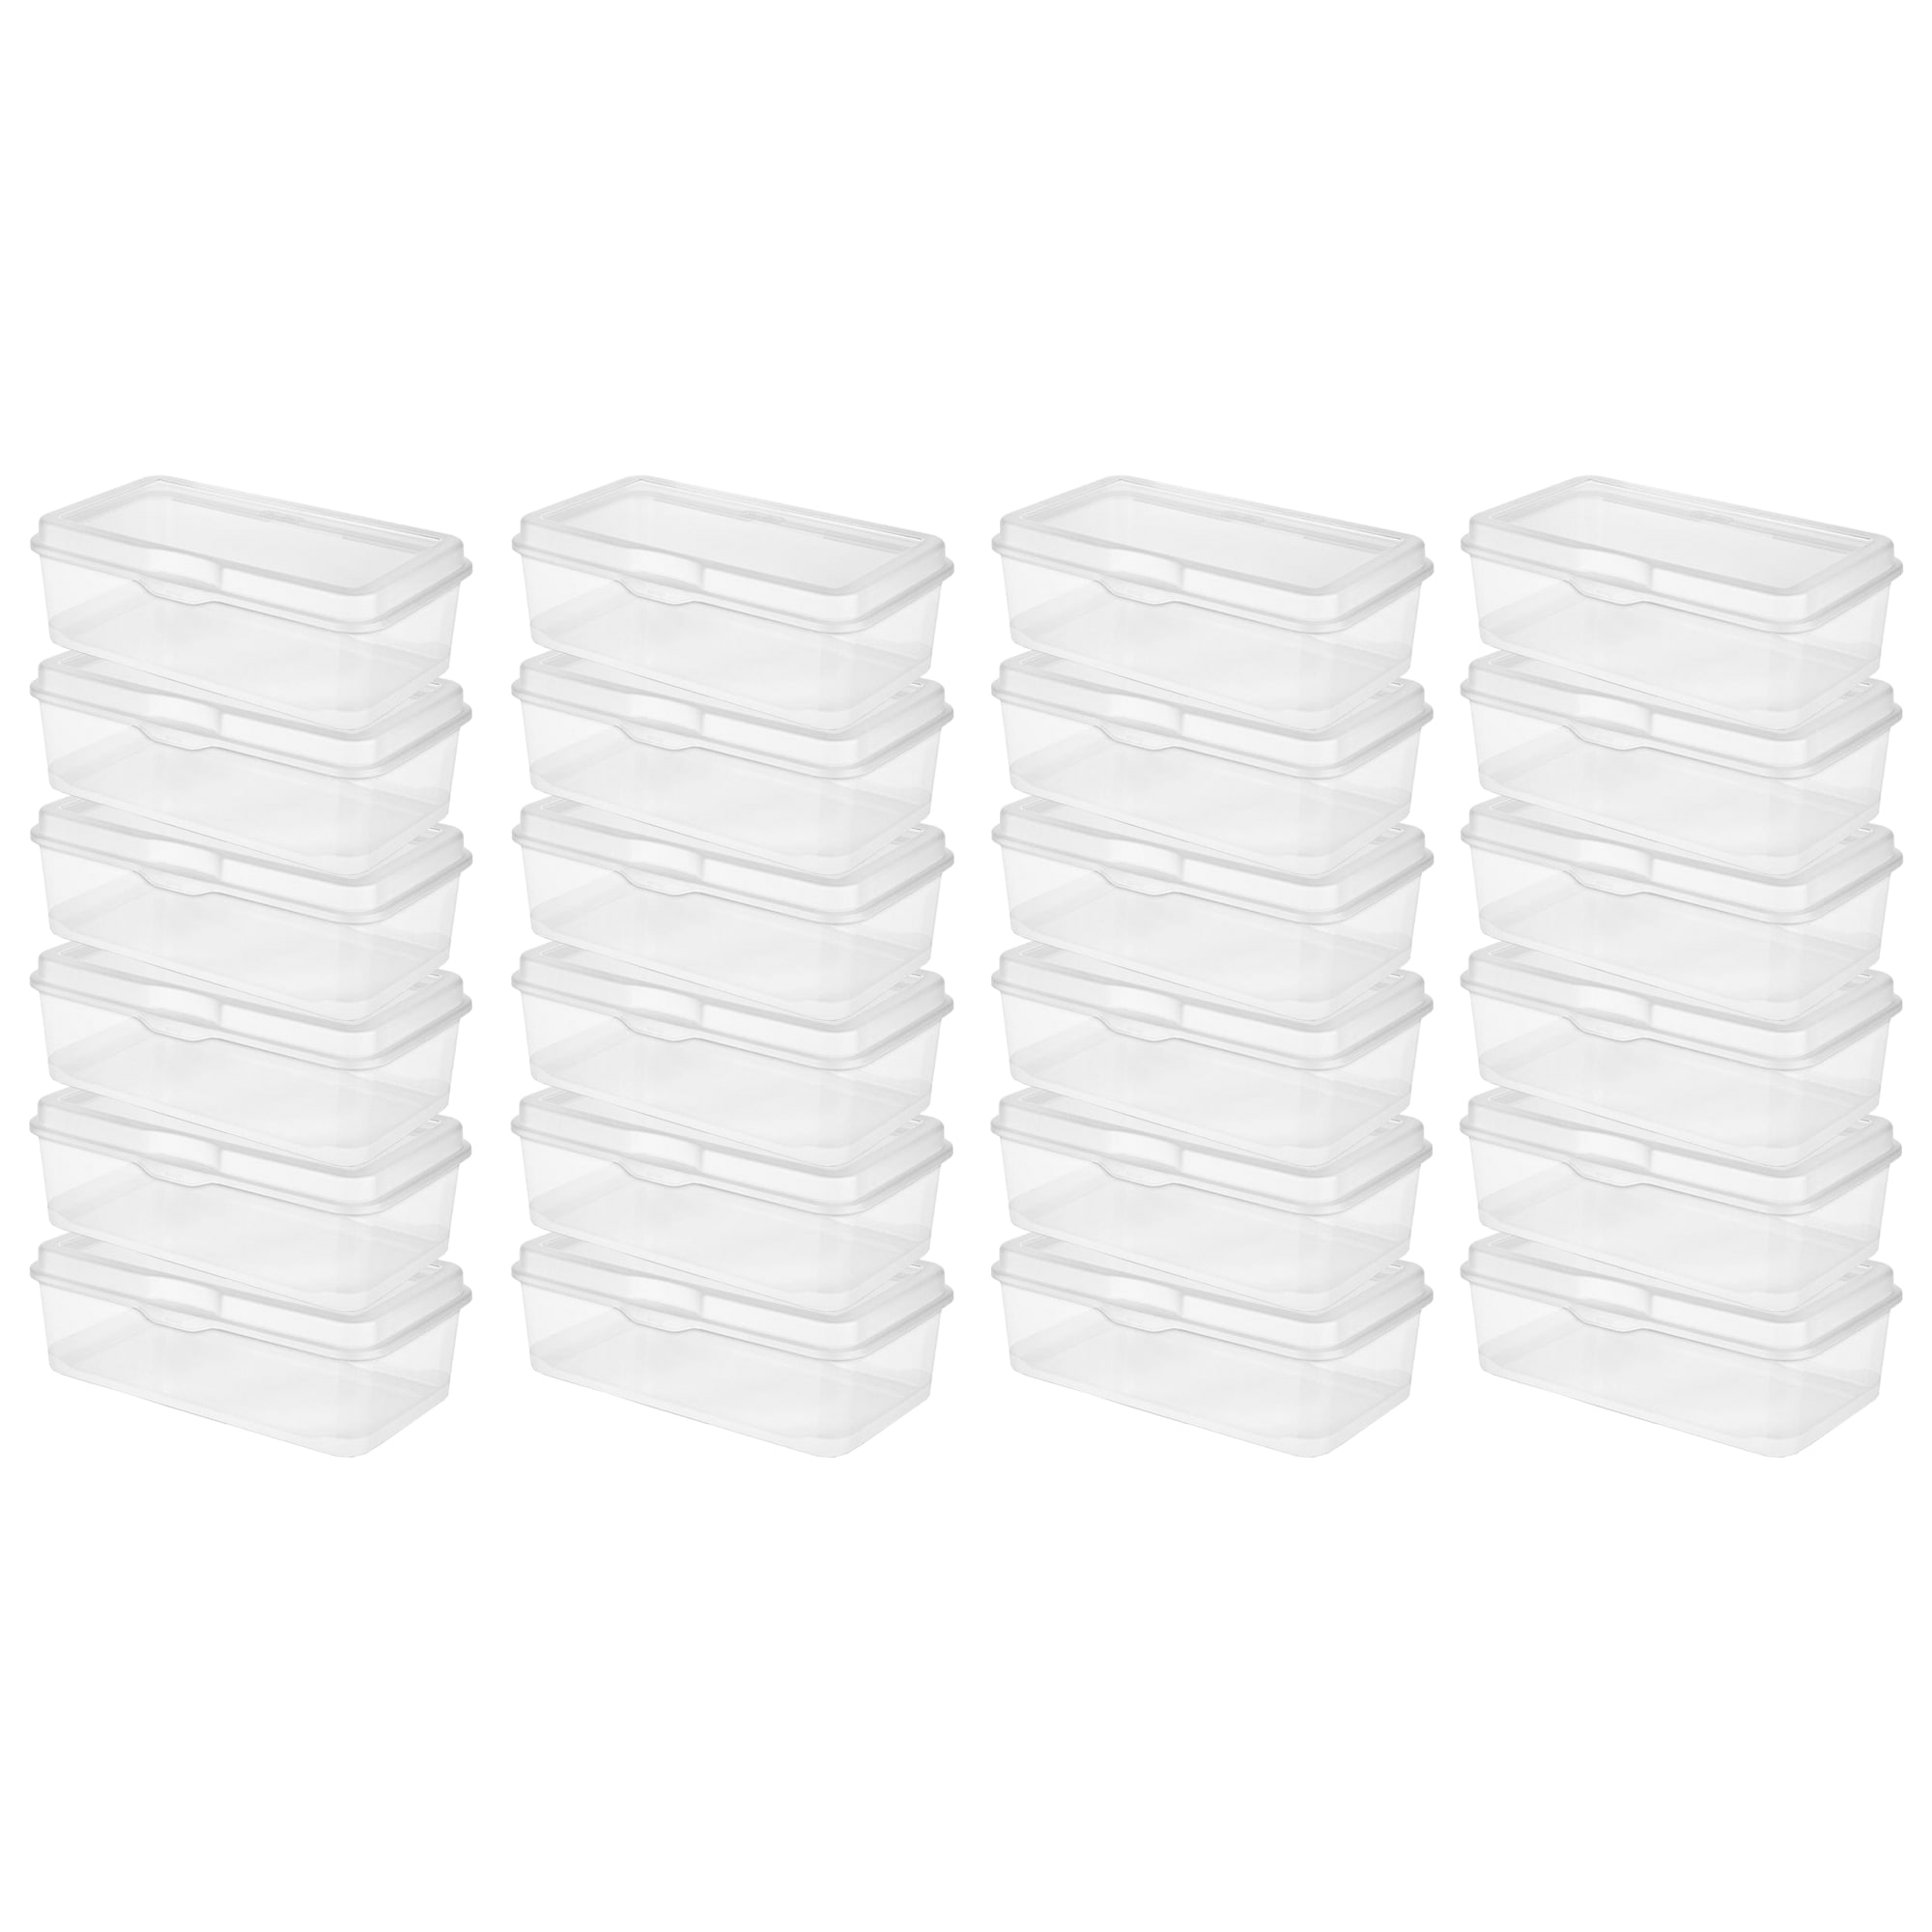 IRIS 9-Pack Project Case Medium 0.5-Gallons (2.5-Quart) Clear Tote with  Standard Snap Lid at